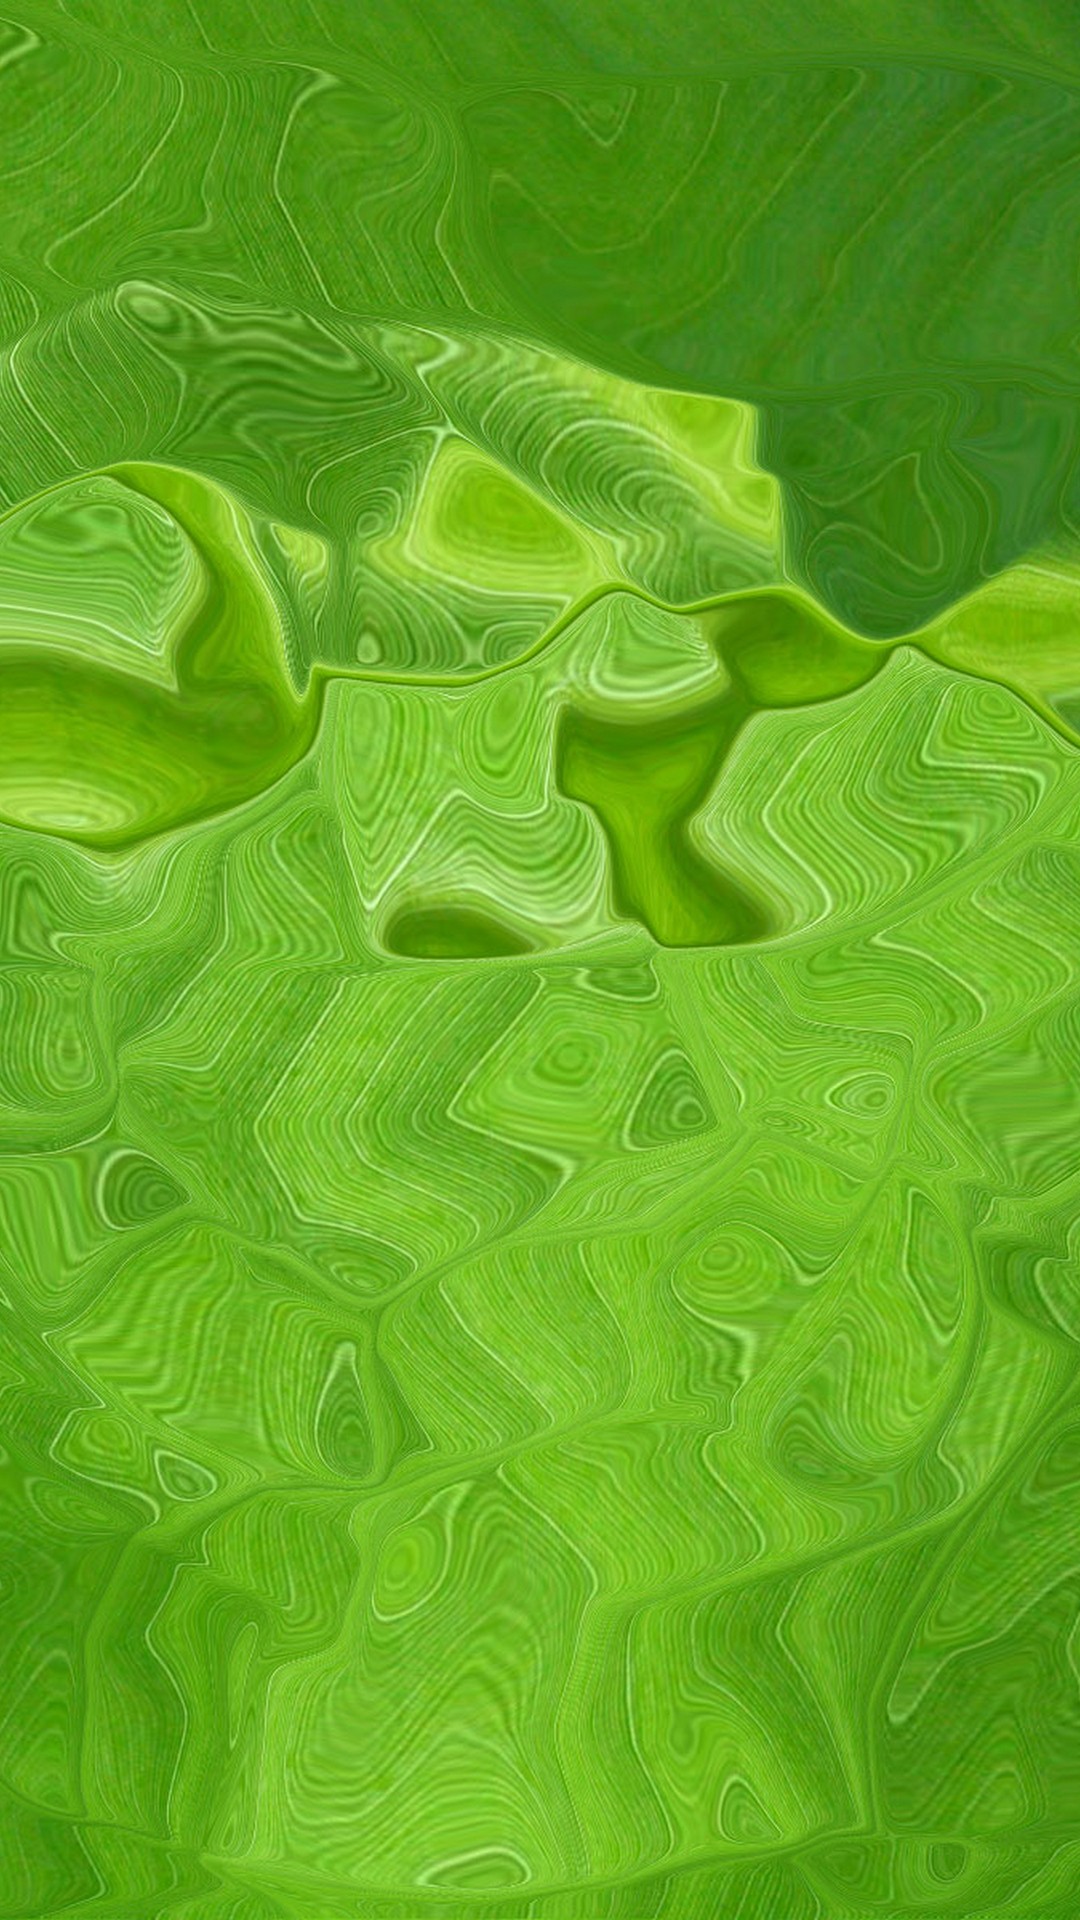 Green Leaf Backgrounds For Android with image resolution 1080x1920 pixel. You can make this wallpaper for your Android backgrounds, Tablet, Smartphones Screensavers and Mobile Phone Lock Screen